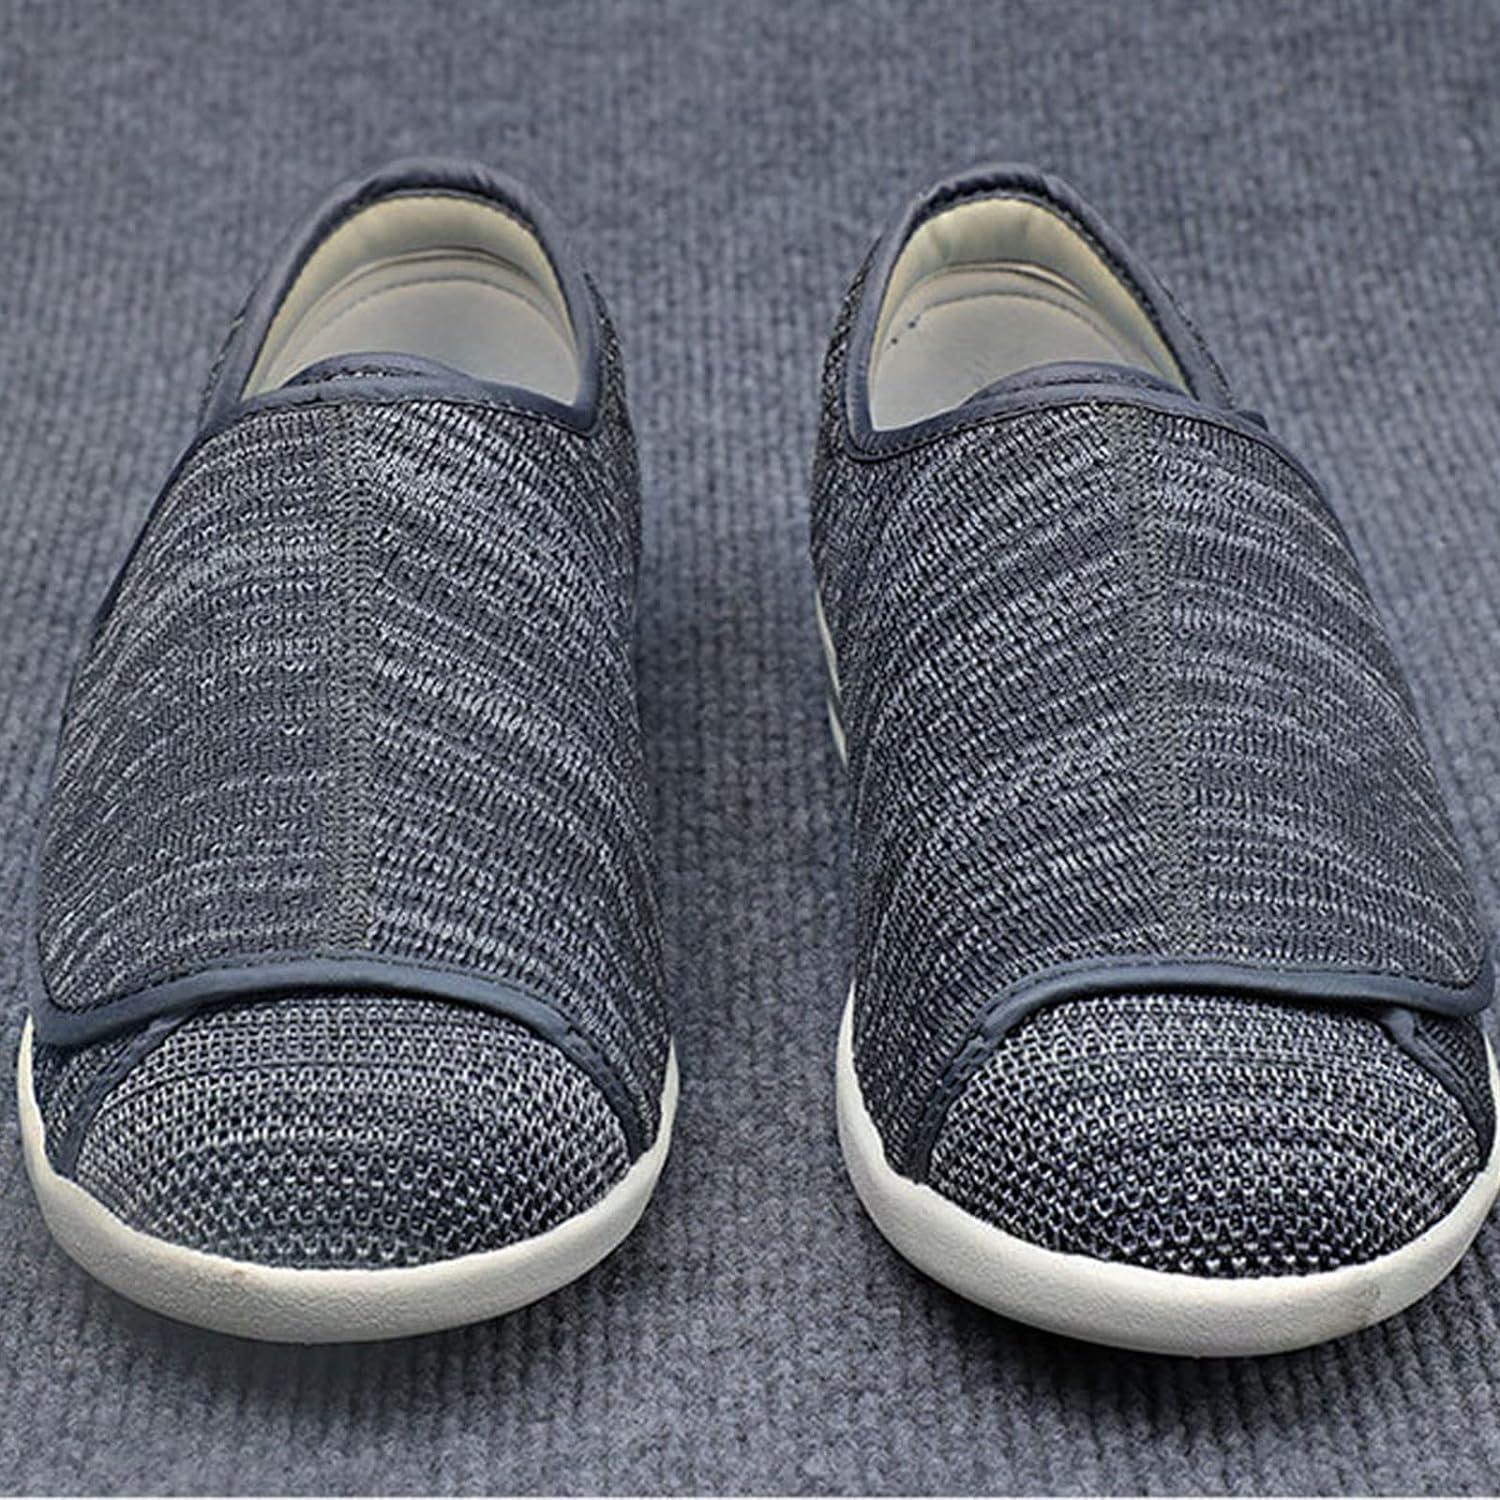 Cathalem Edema Slippers for Men Extra Wide Width Women's Cotton Slippers  Shoes Warm Home Shoes Men's Indoor Soft-soled Men's Shoes Grey 11 